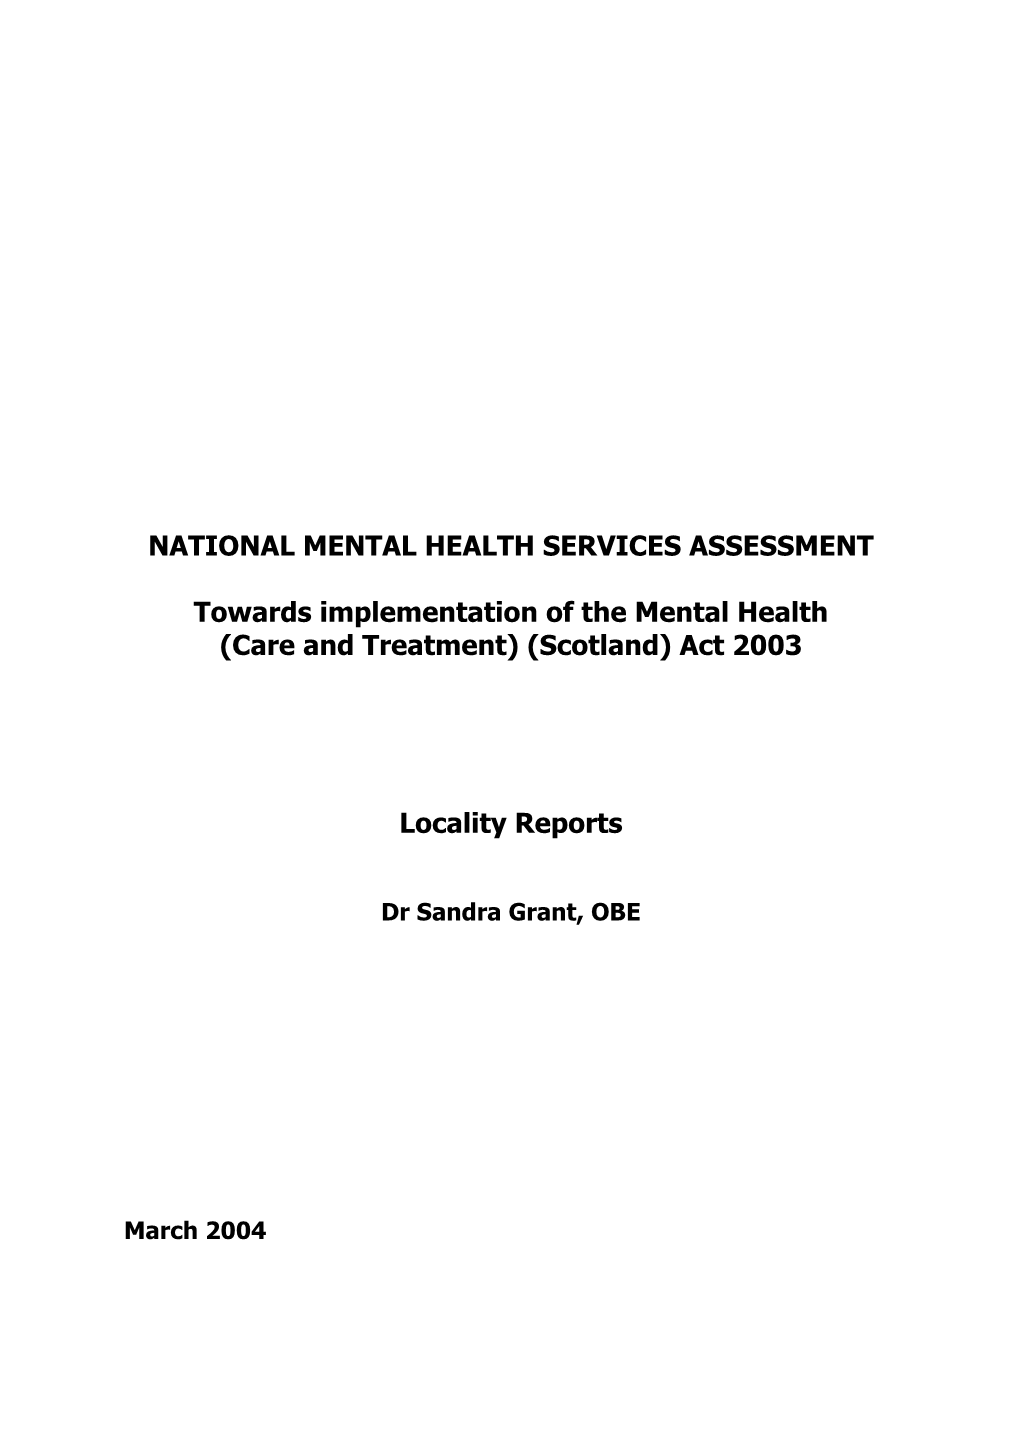 National Mental Health Services Assessment: Locality Reports